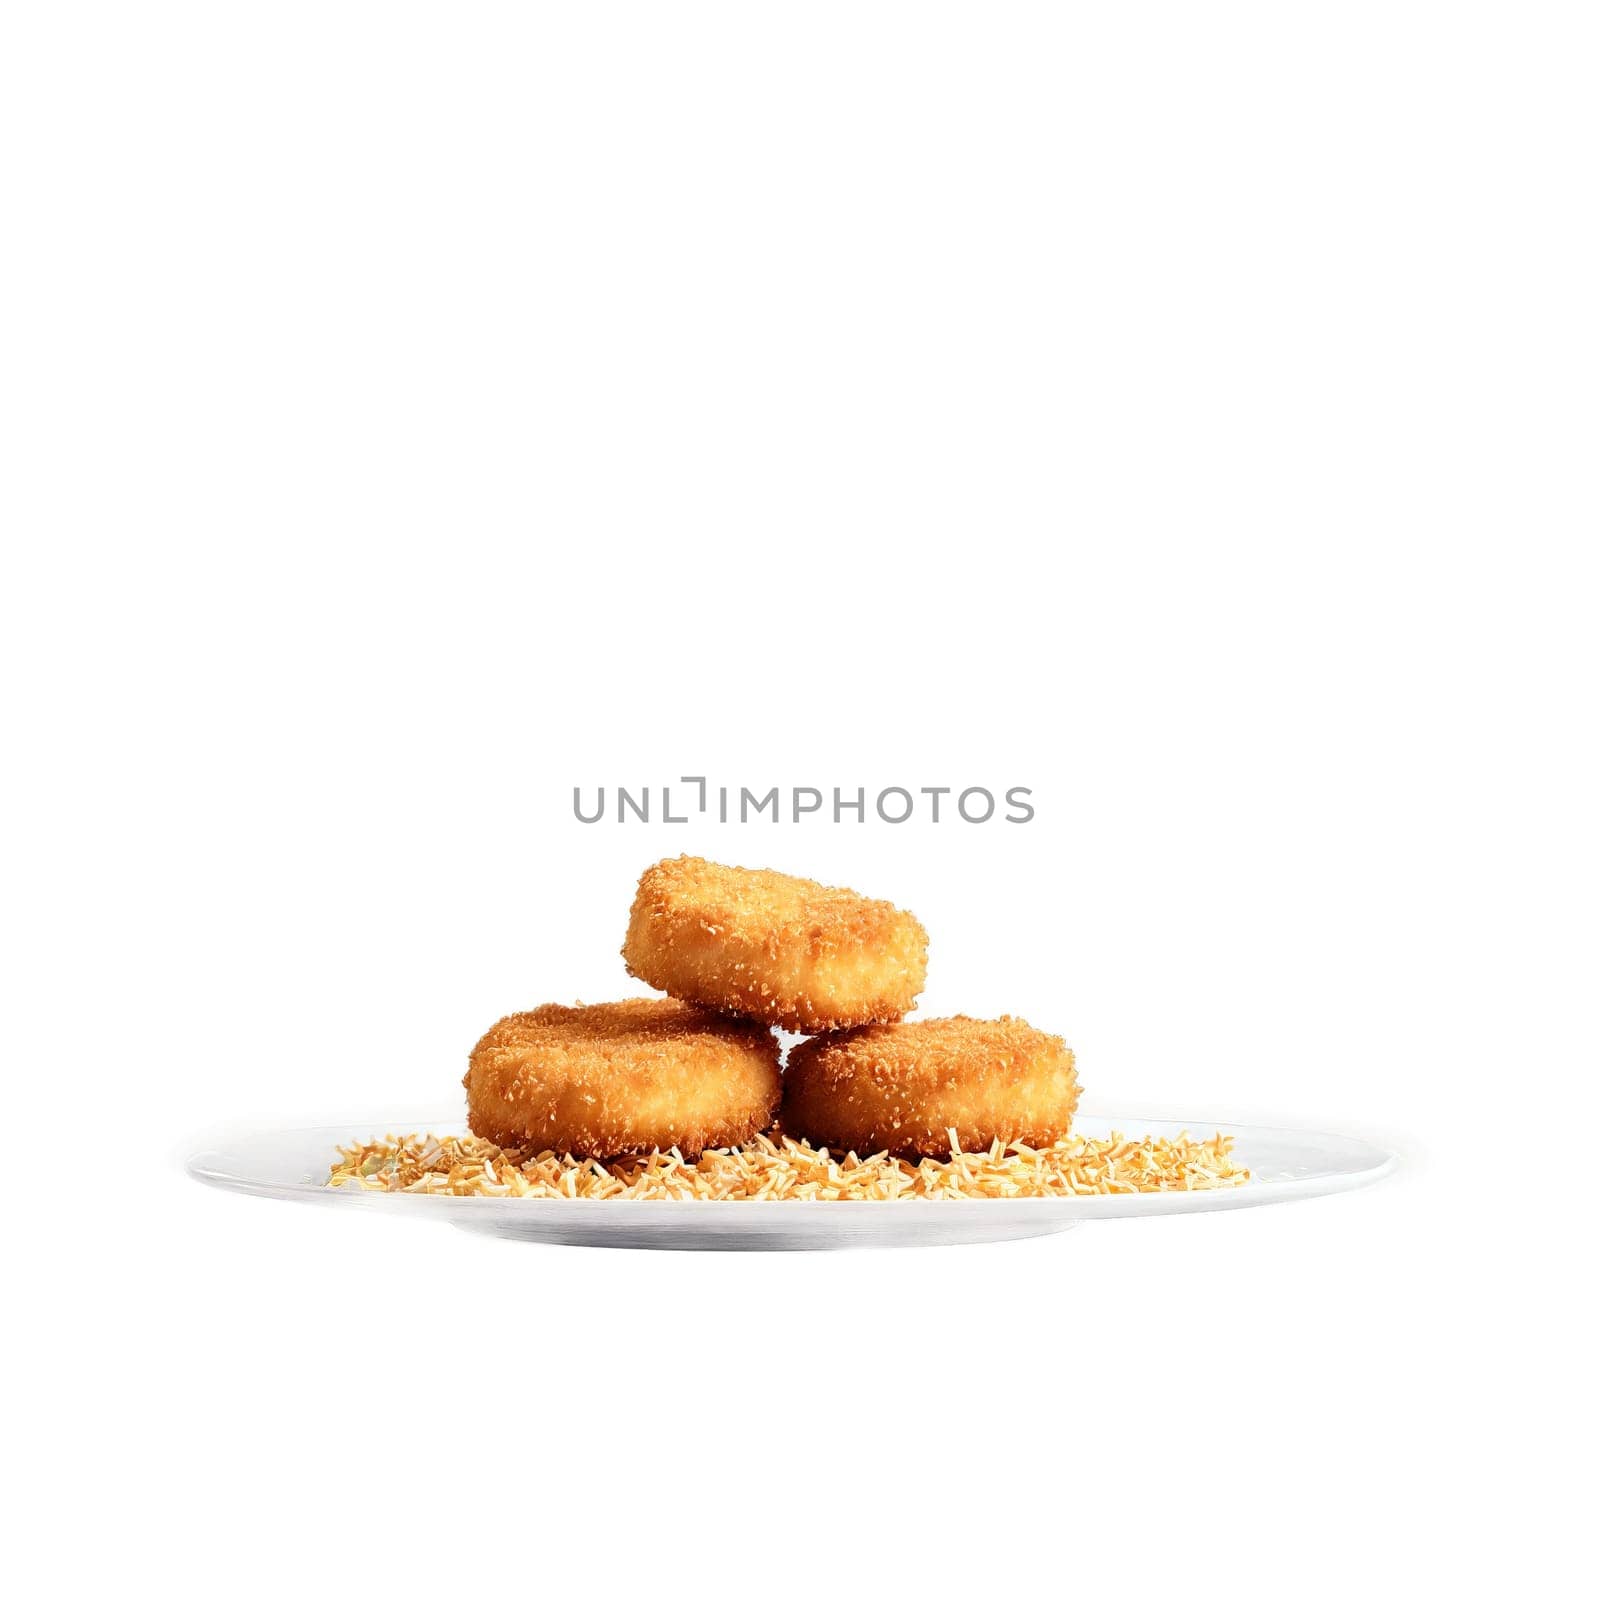 Chicken nuggets with crispy golden breading levitating and steaming Food and culinary concept by panophotograph